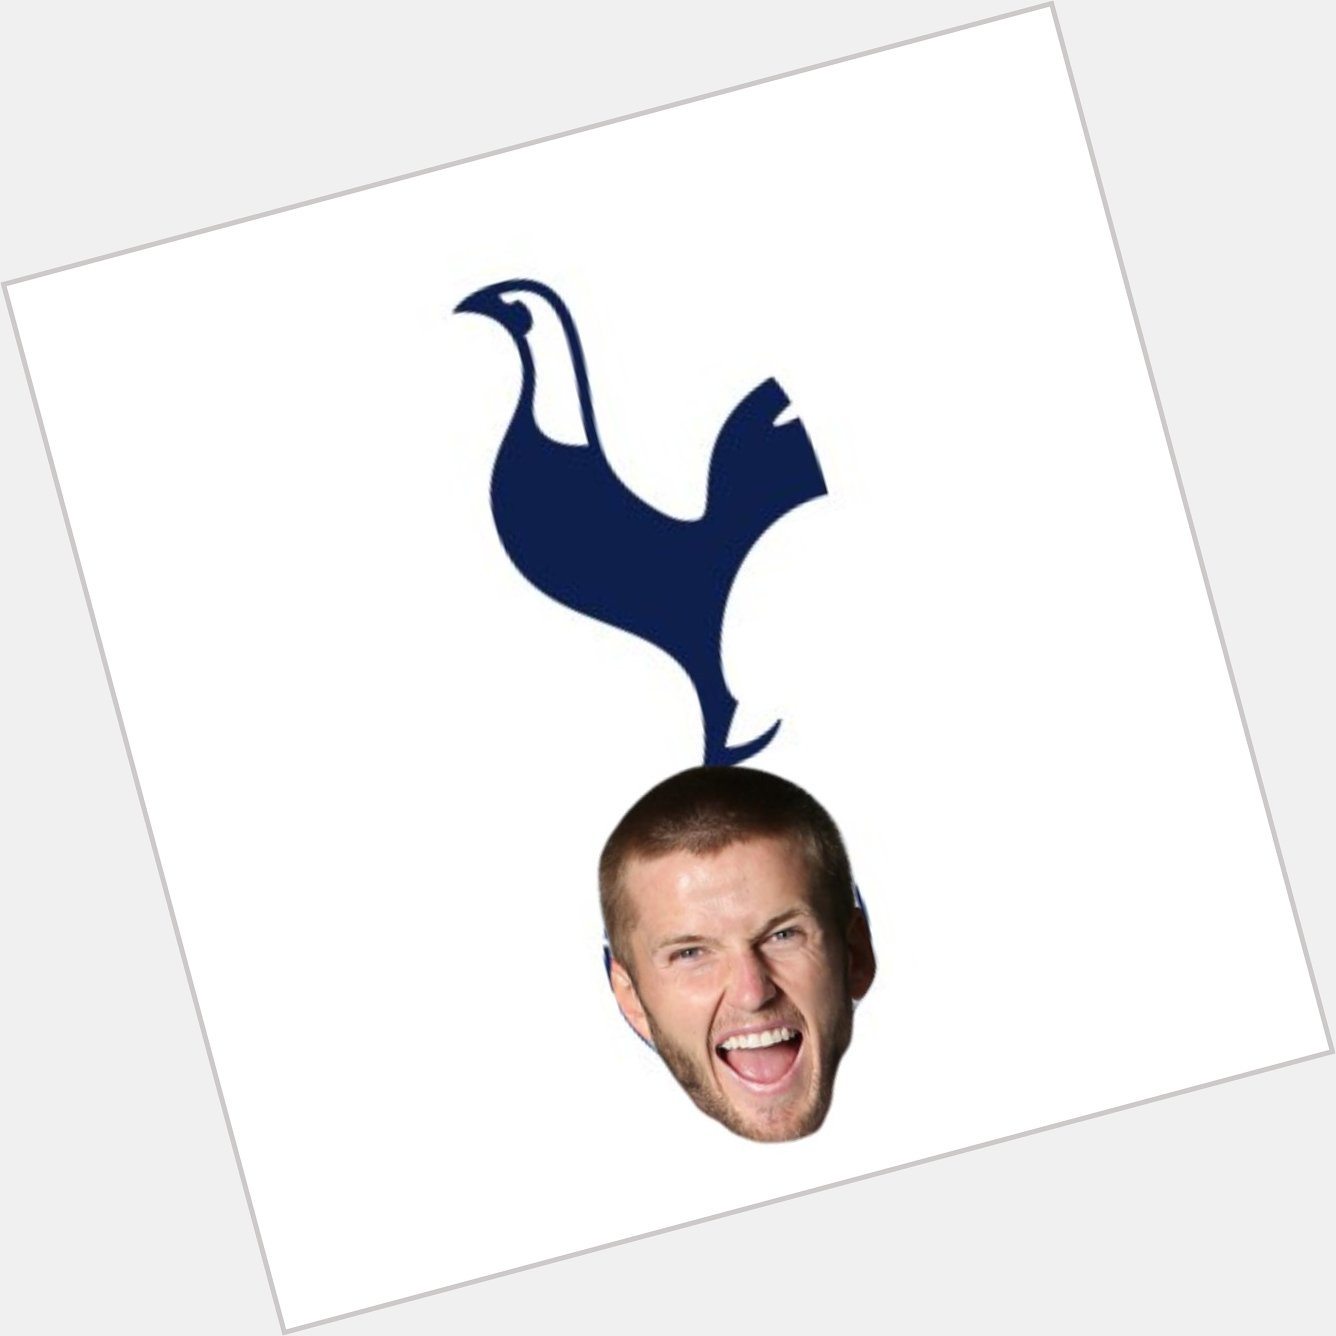 I LOVE ERIC DIER, ERIC DIER LOVES MEEE

Happy birthday have a good one  